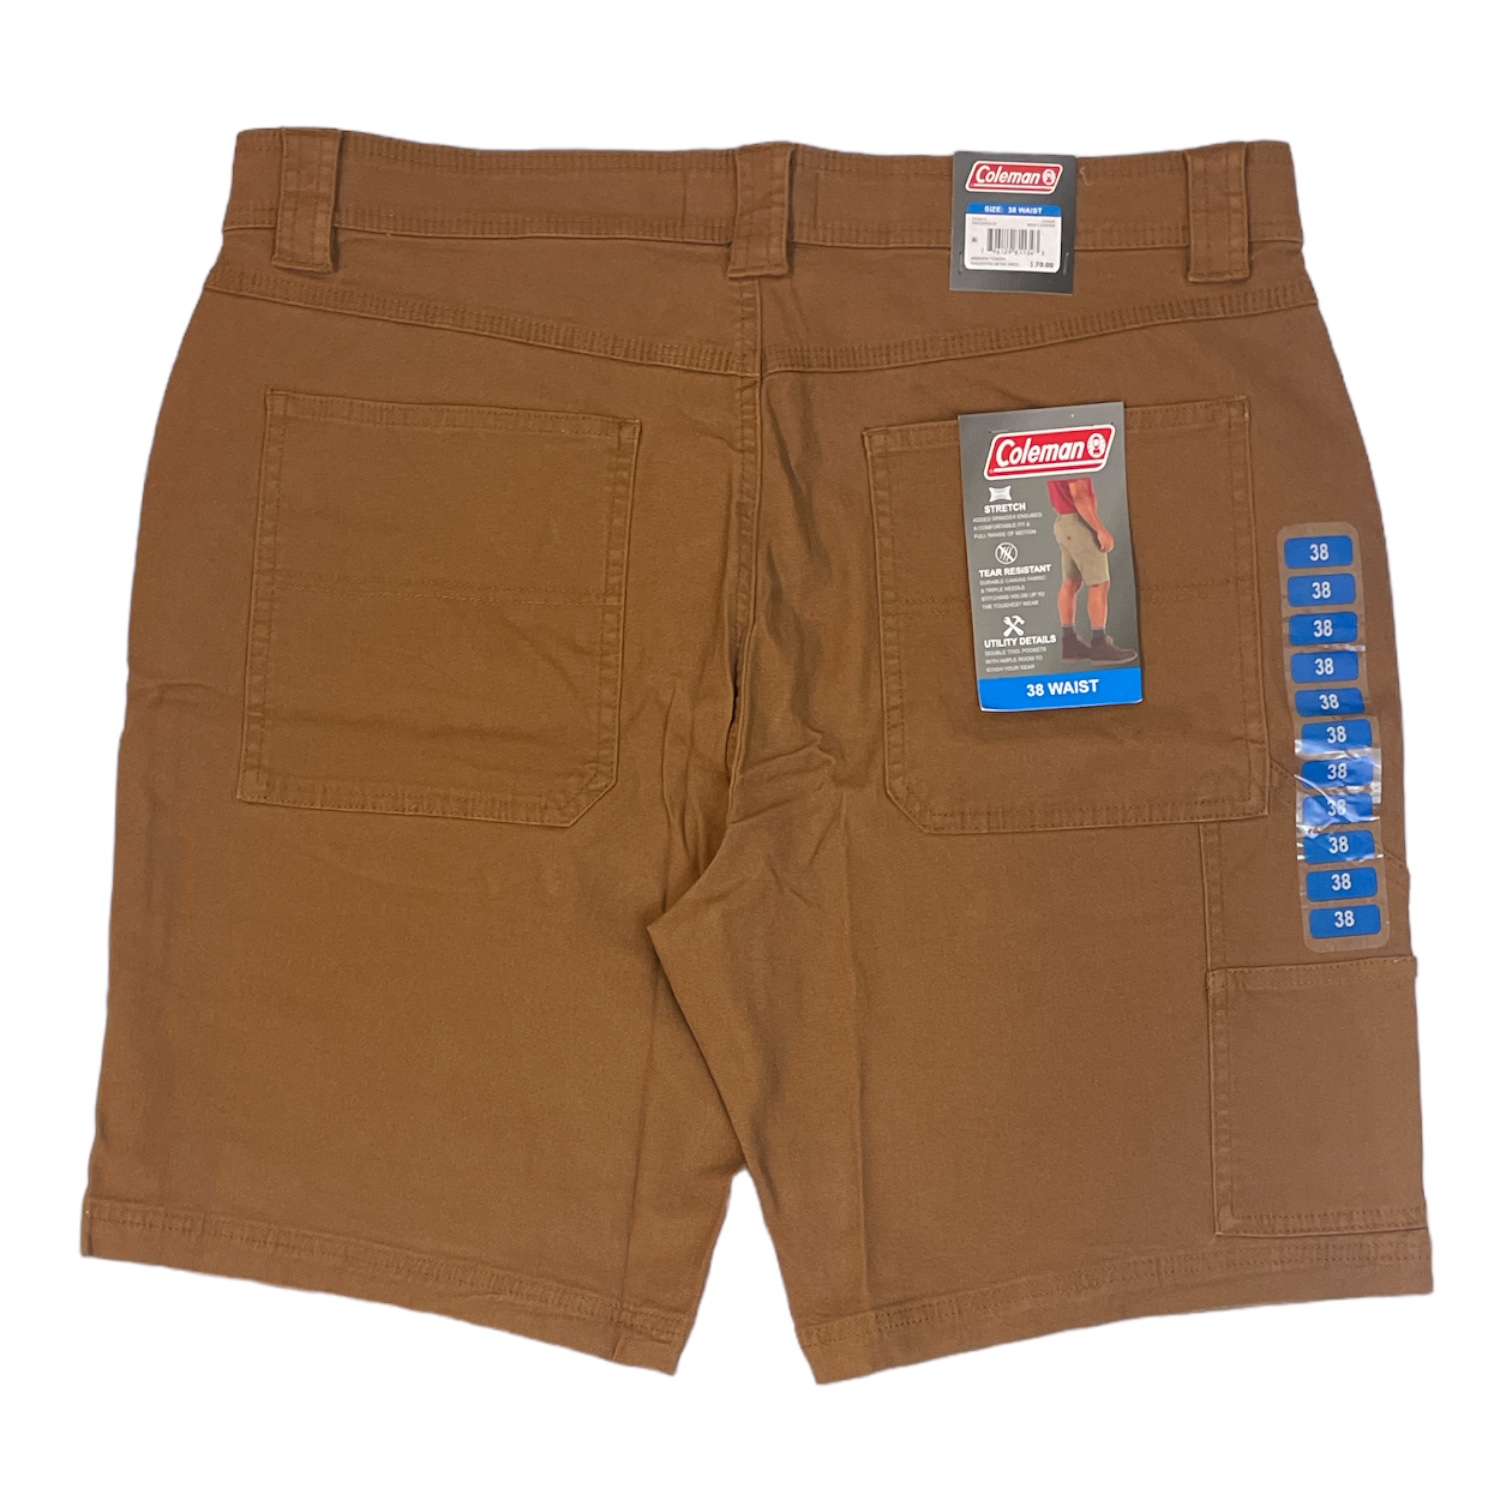 Coleman Men's Relaxed Fit Tear Resistant Stretch Utility Shorts - image 2 of 2